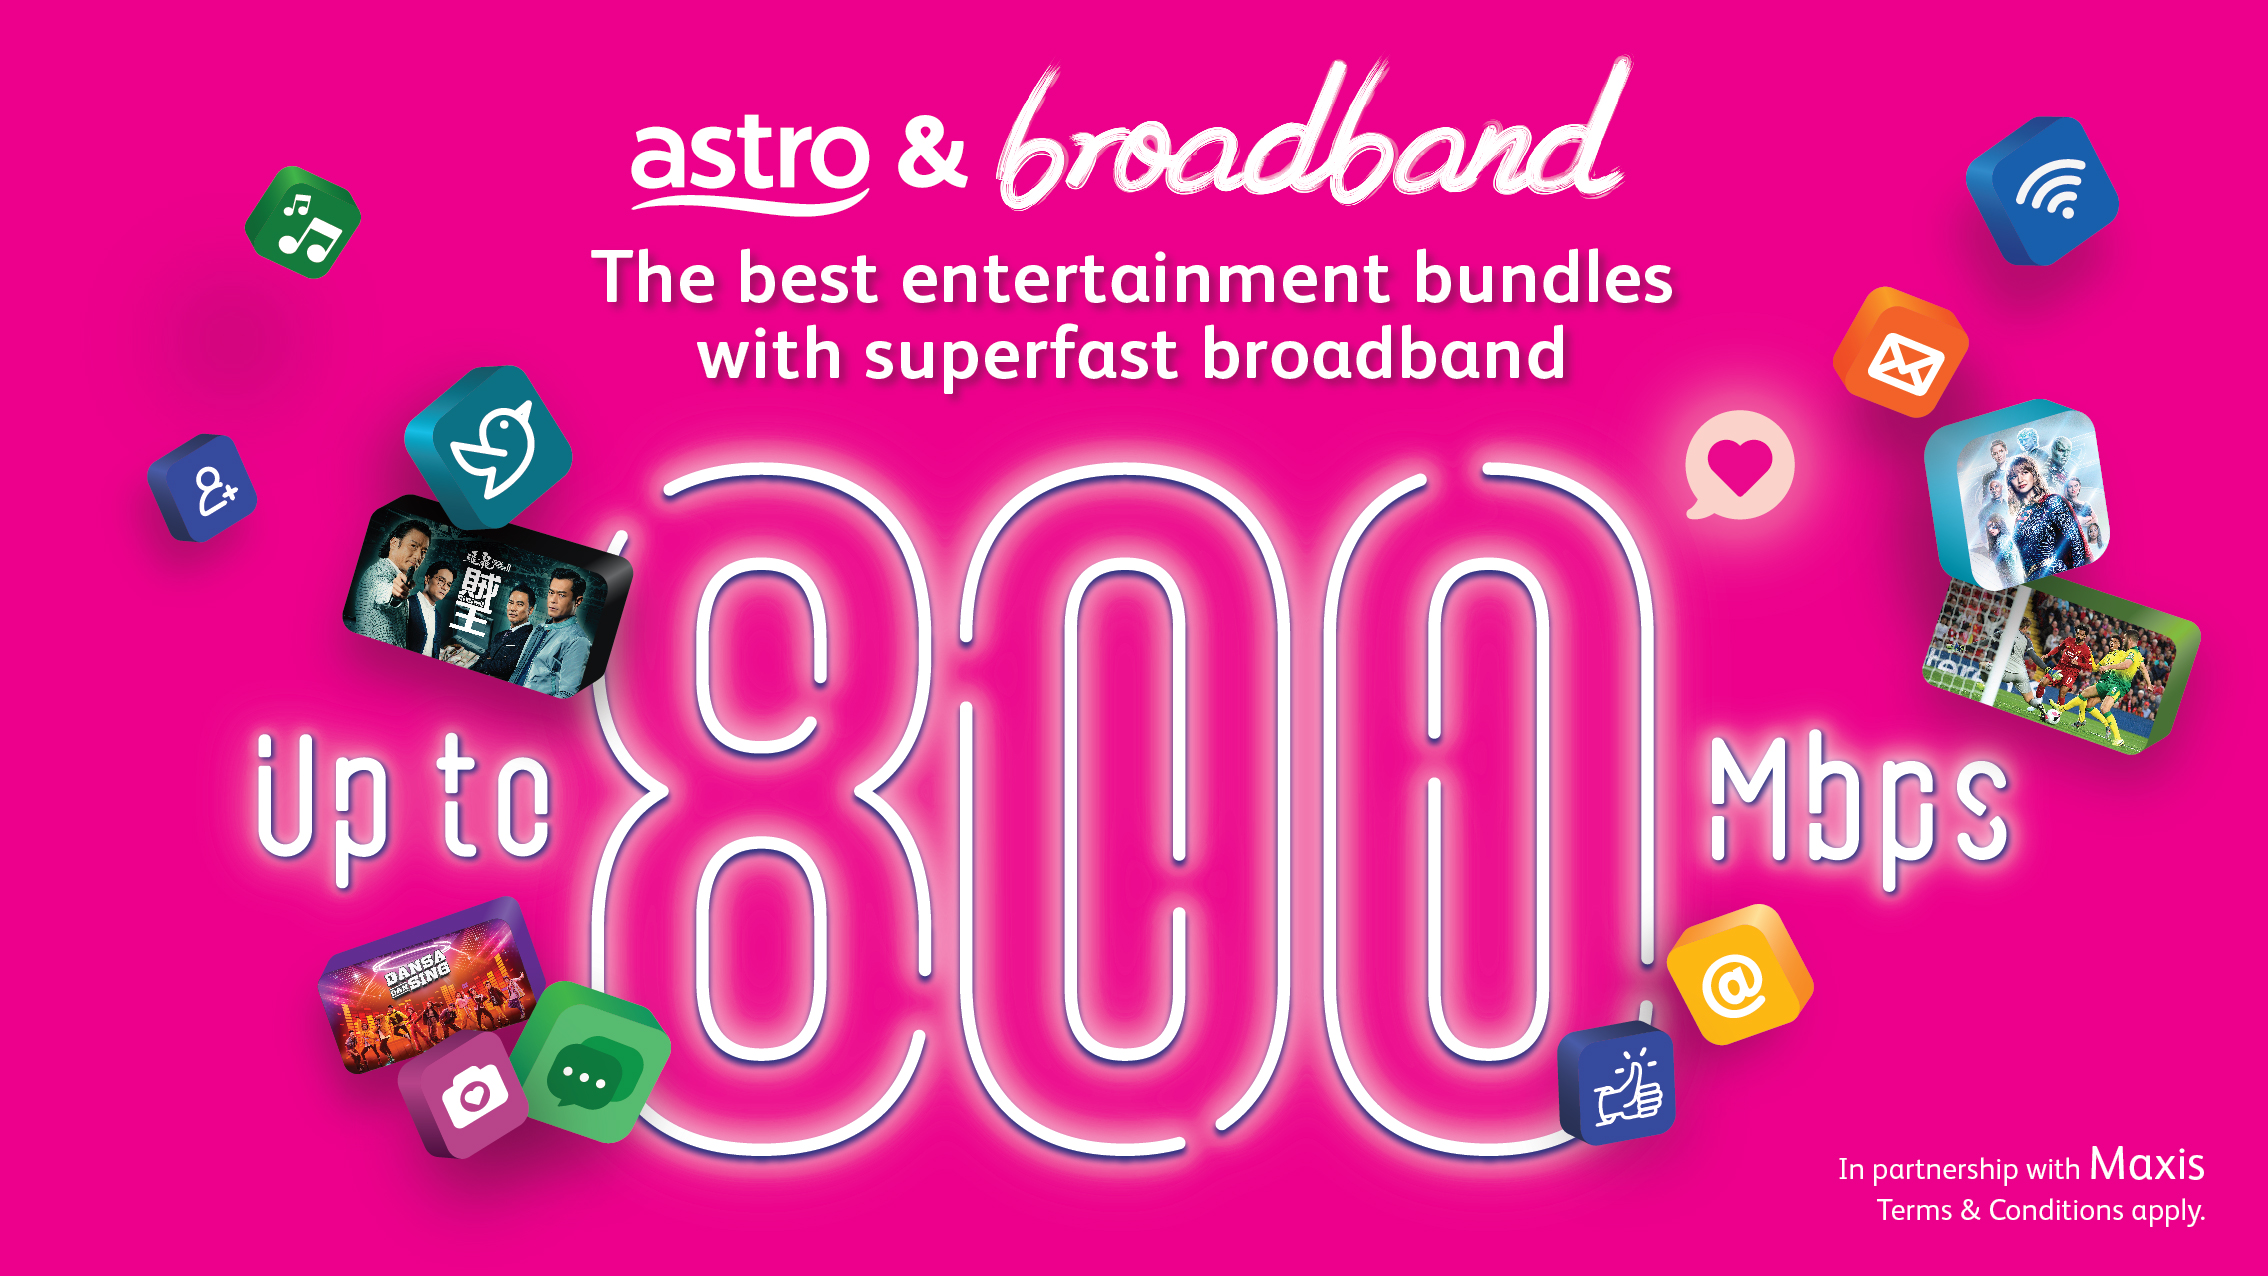 Astro &amp; Maxis offer three new additional content bundled packages